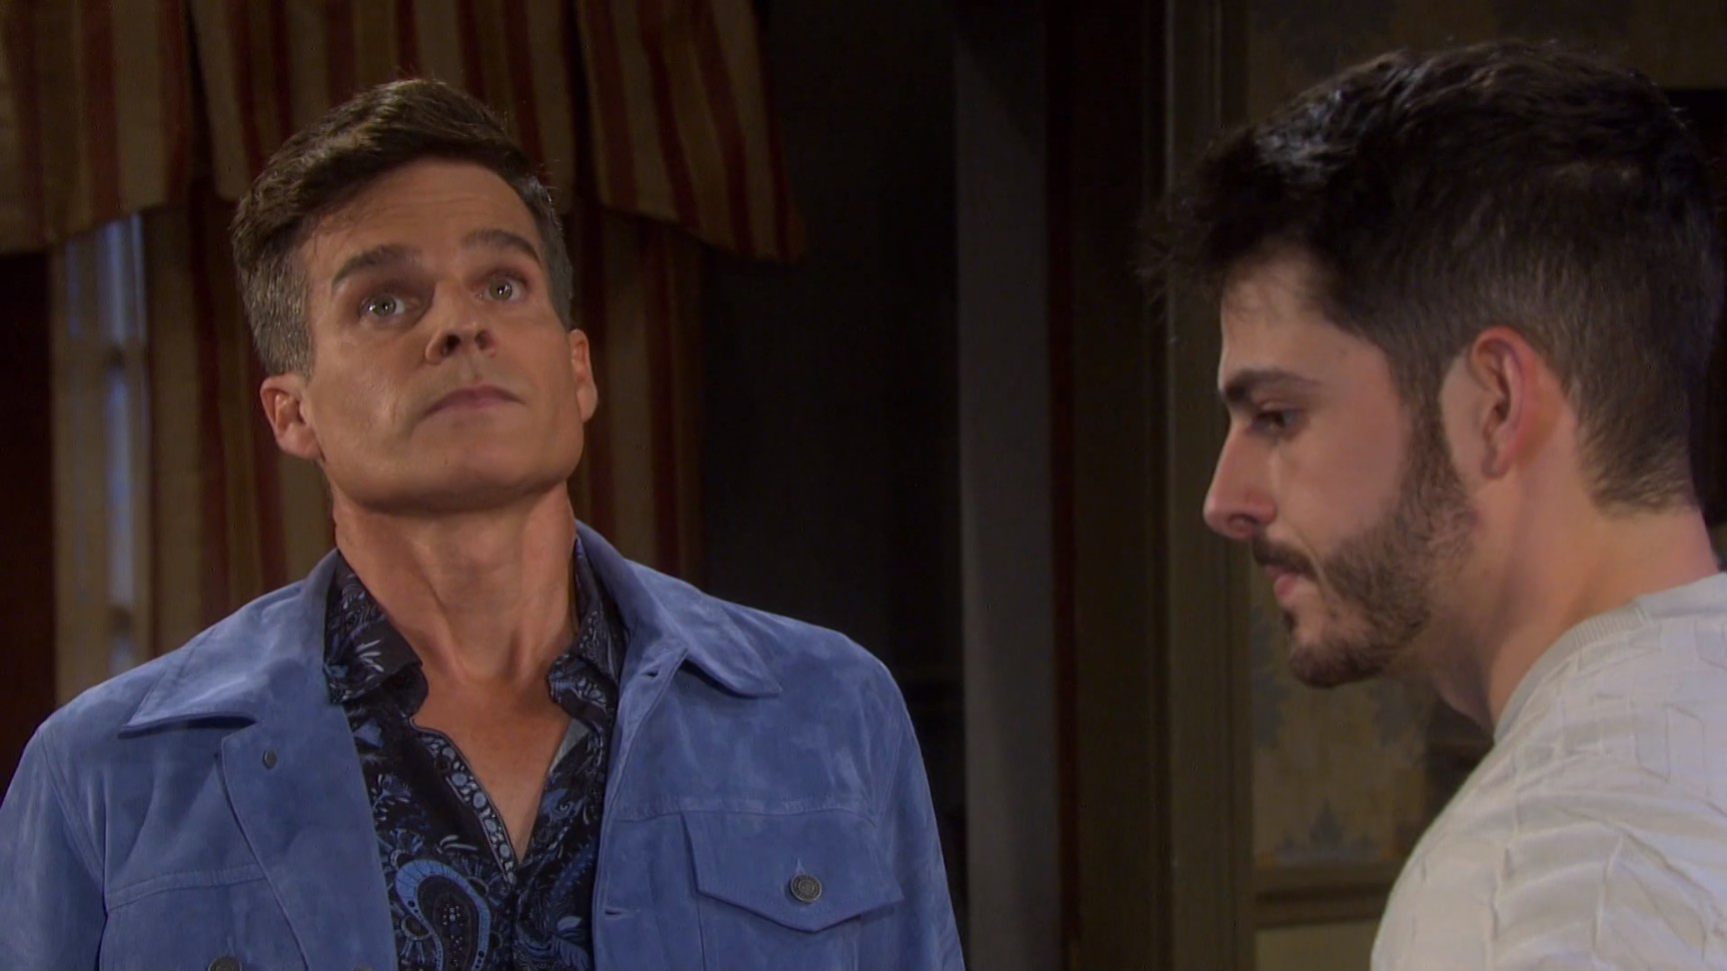 sonny with leo talking about want ads days of our lives recaps soapsspoilers